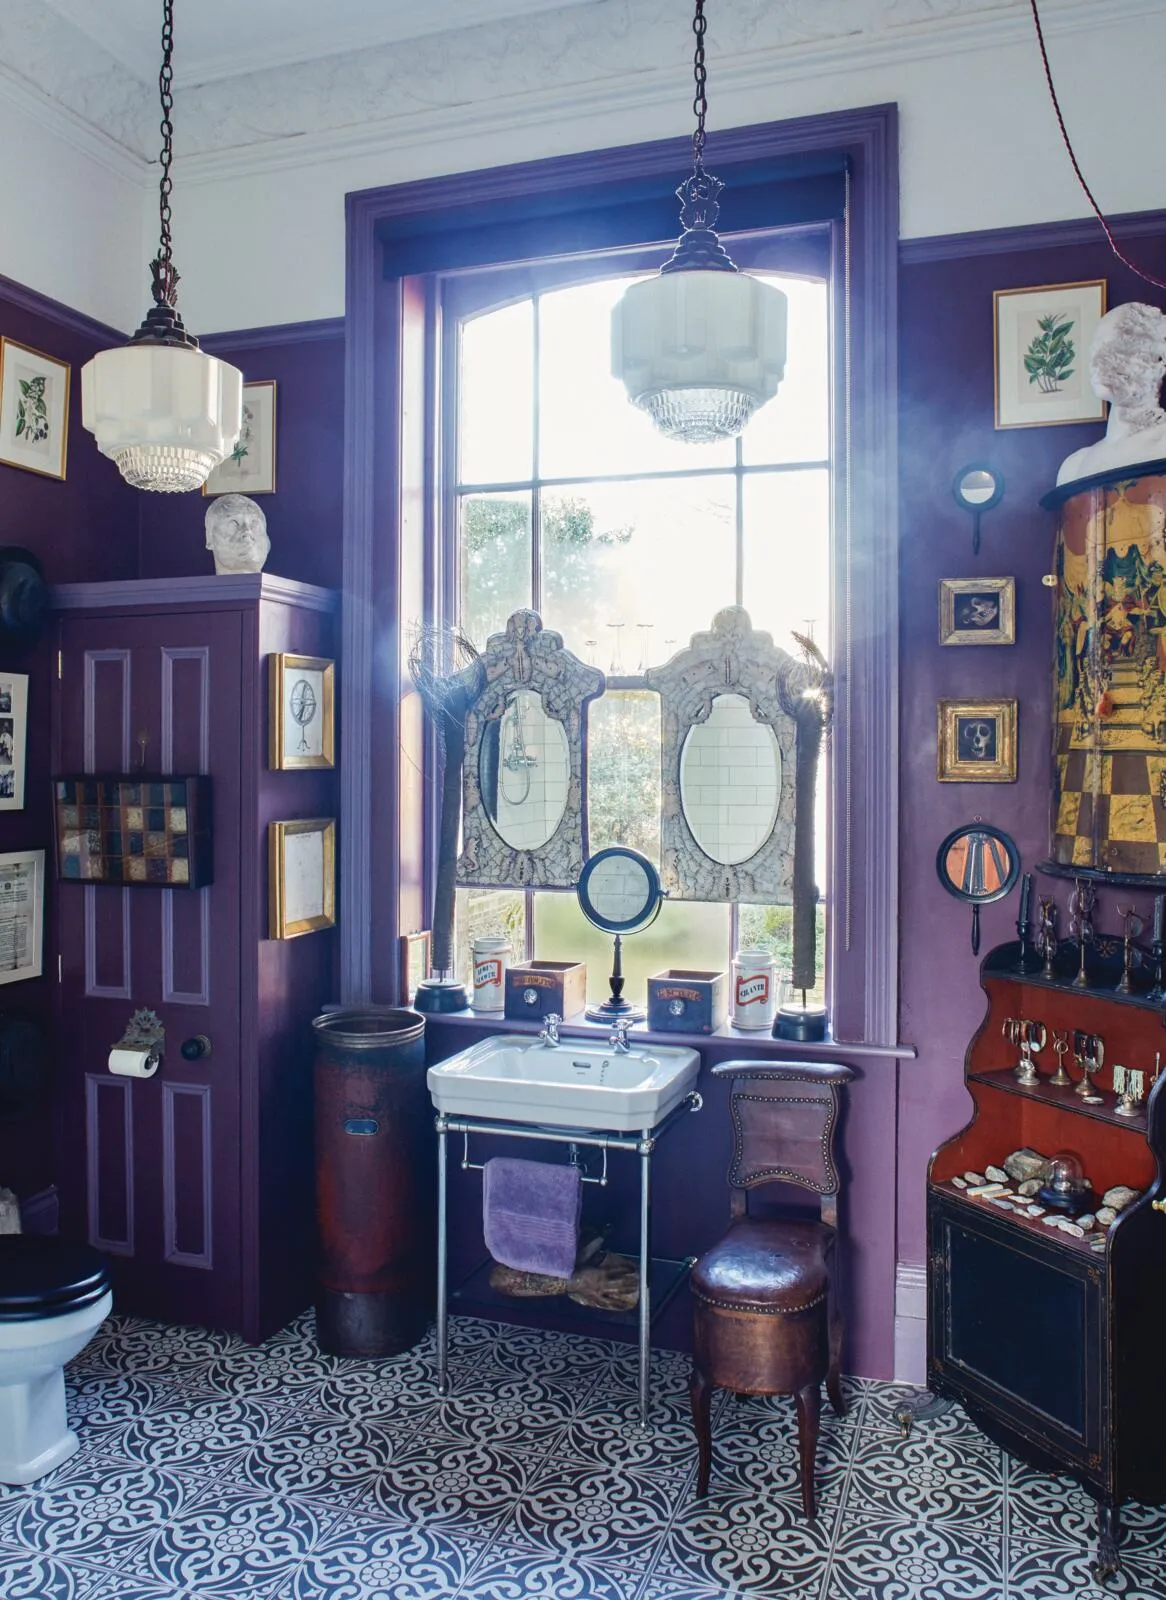 Gothic apartment collections in the bathroom